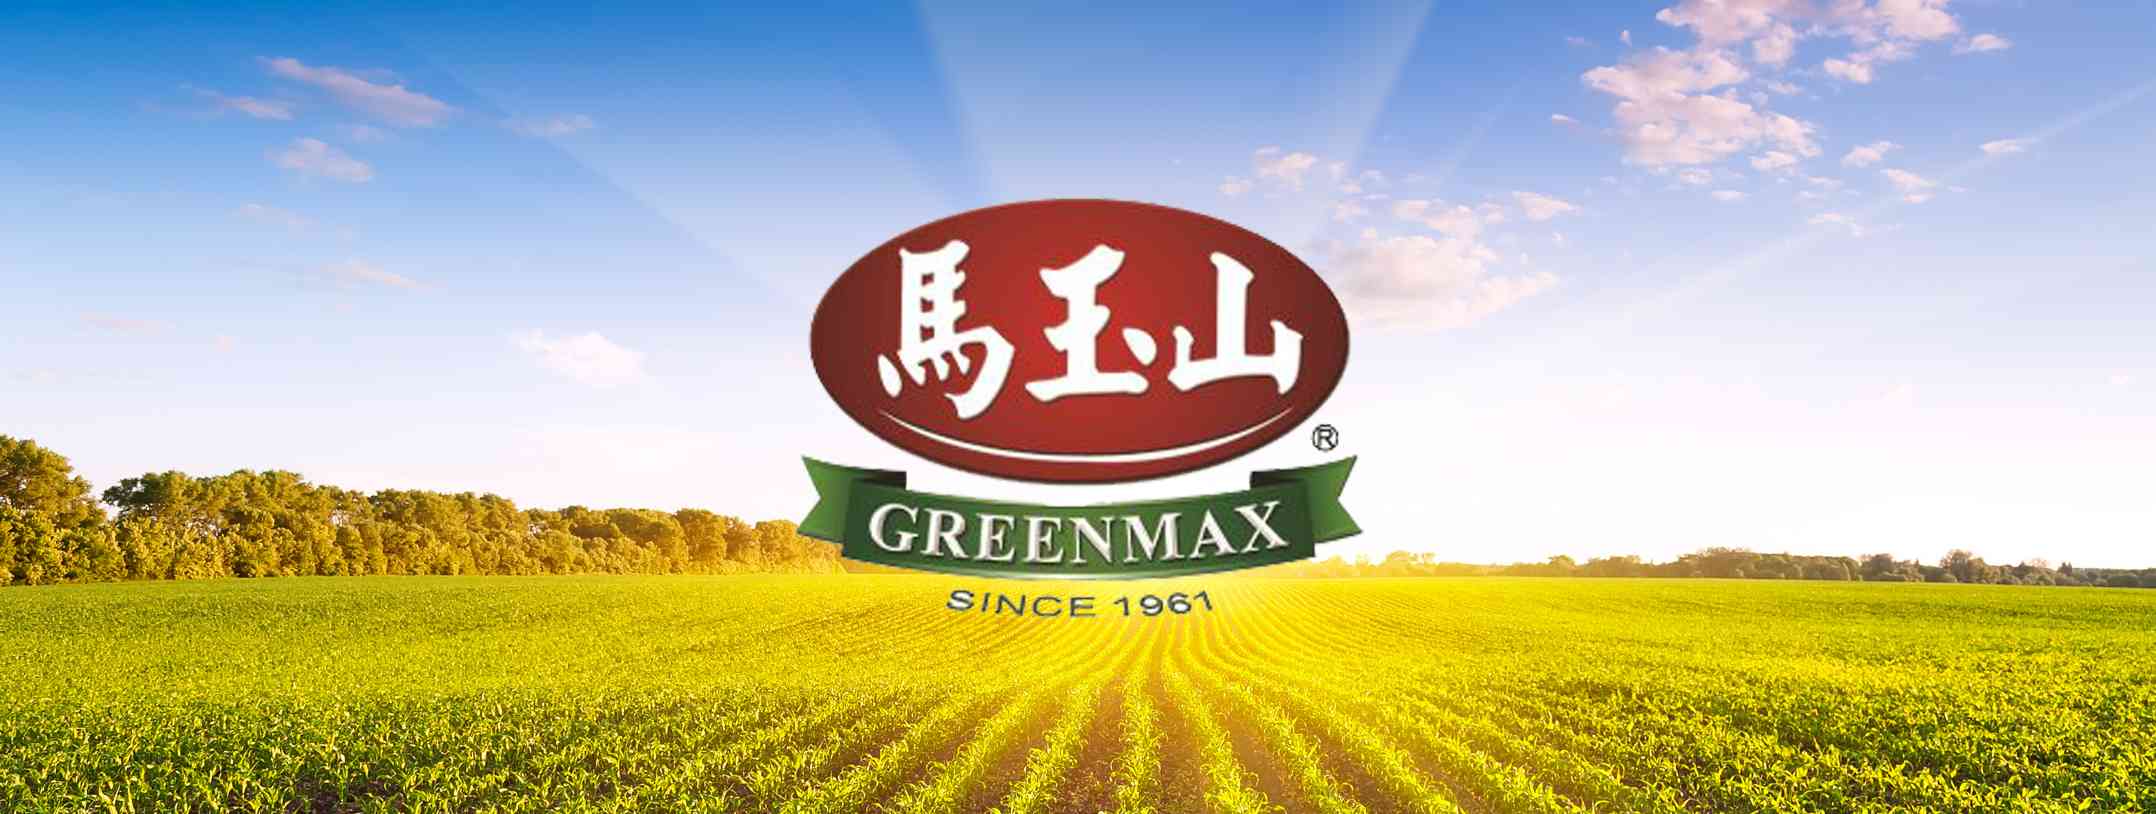 18-facts-about-greenmax